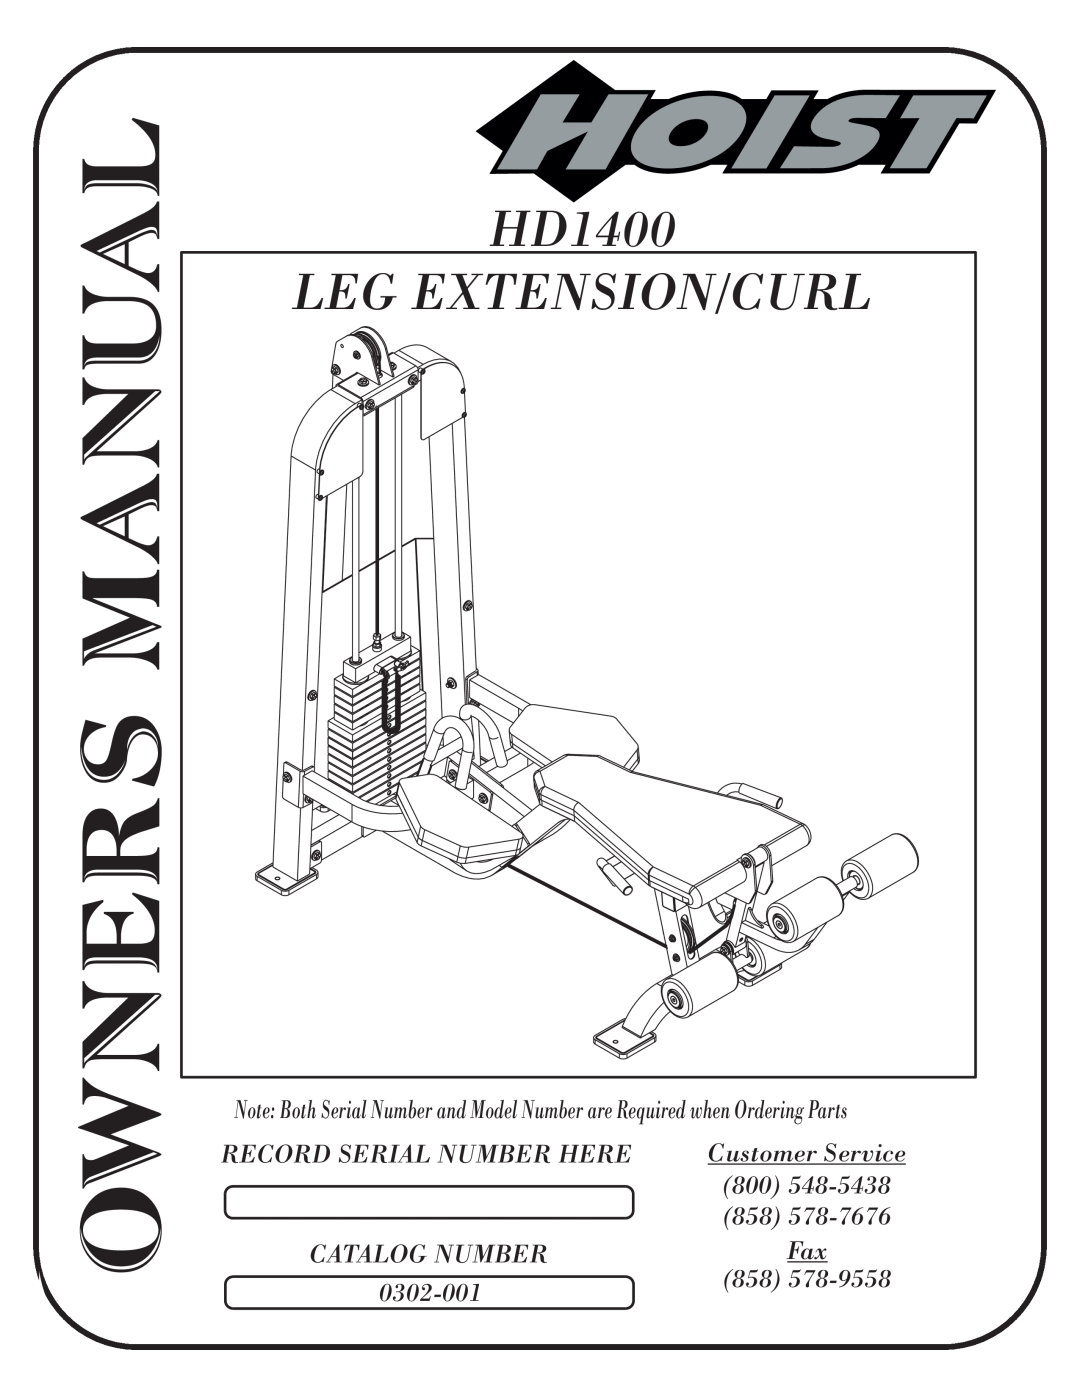 Hoist Fitness HDI400 owner manual Owners Manual, HD1400, Leg Extension/Curl, Record Serial Number Here, Customer Service 